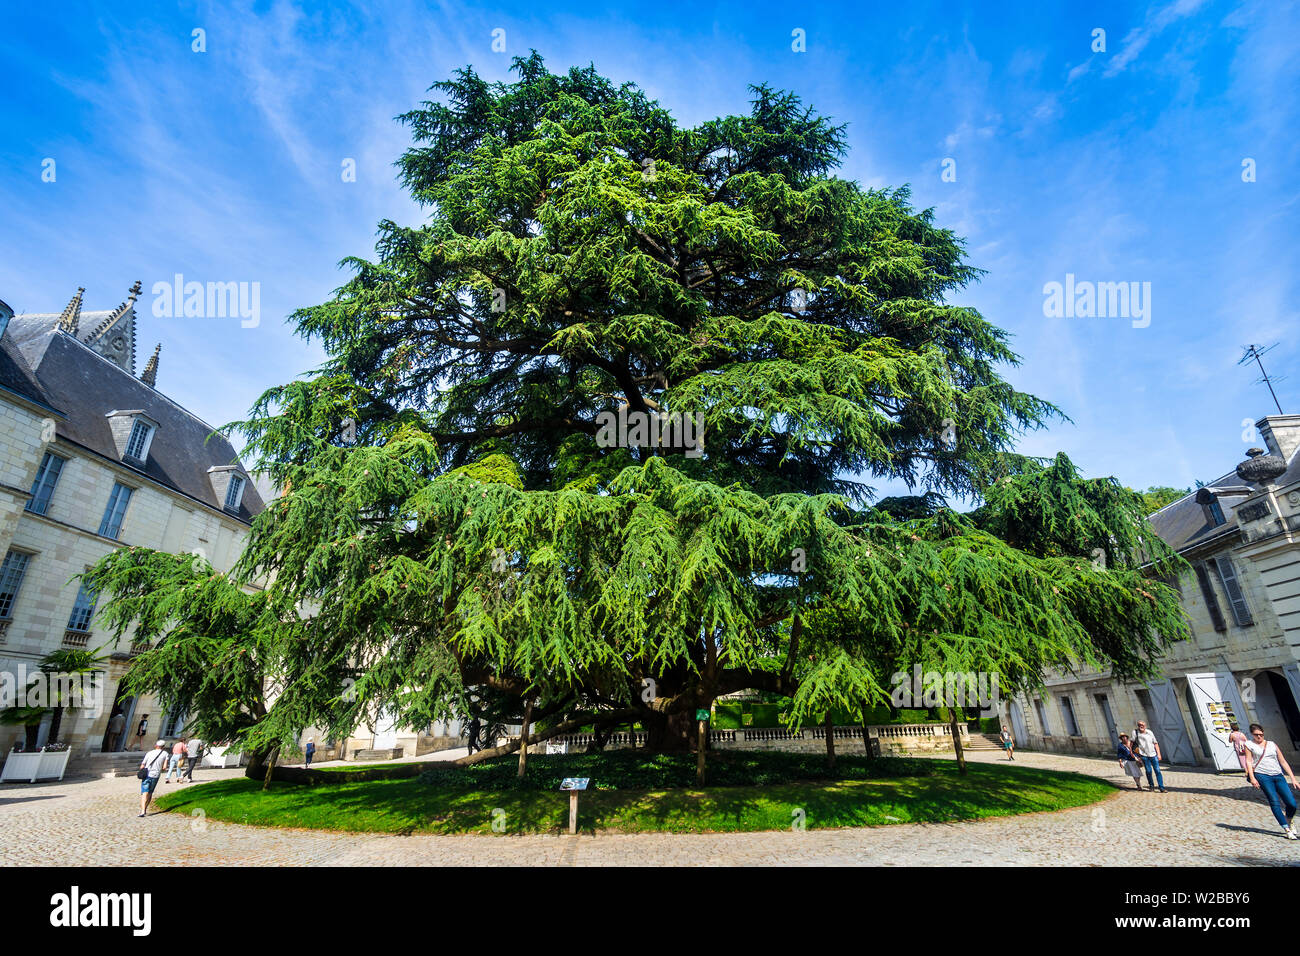 Large Cedar of Lebanon (planted 1804) in garden of Saint Gatien cathedral, Tours, France. Stock Photo